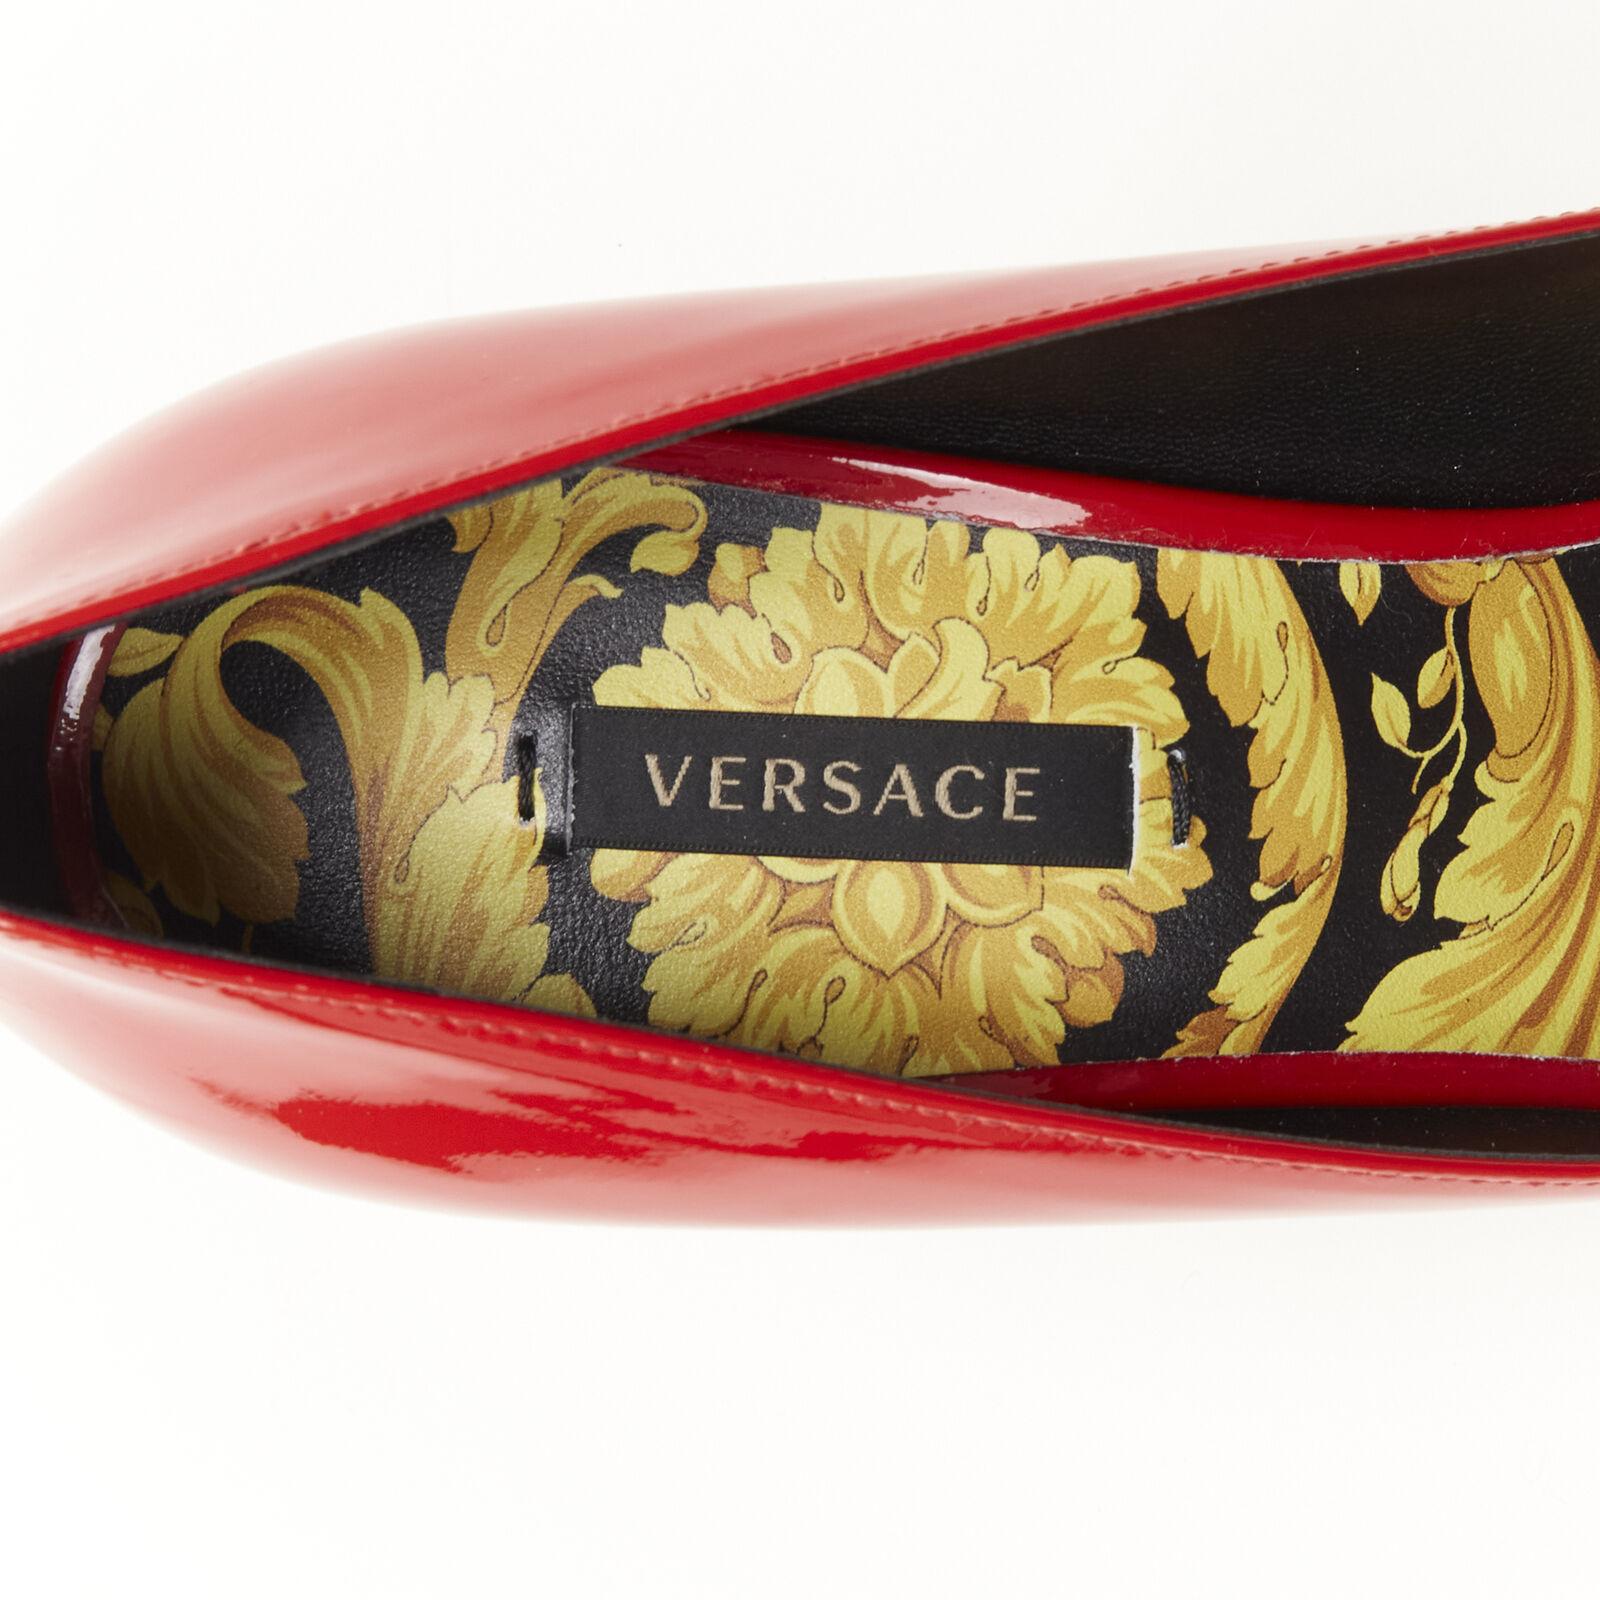 new VERSACE Hibiscus Barocco gold sole red patent Medusa stud pump EU38.5 For Sale 4